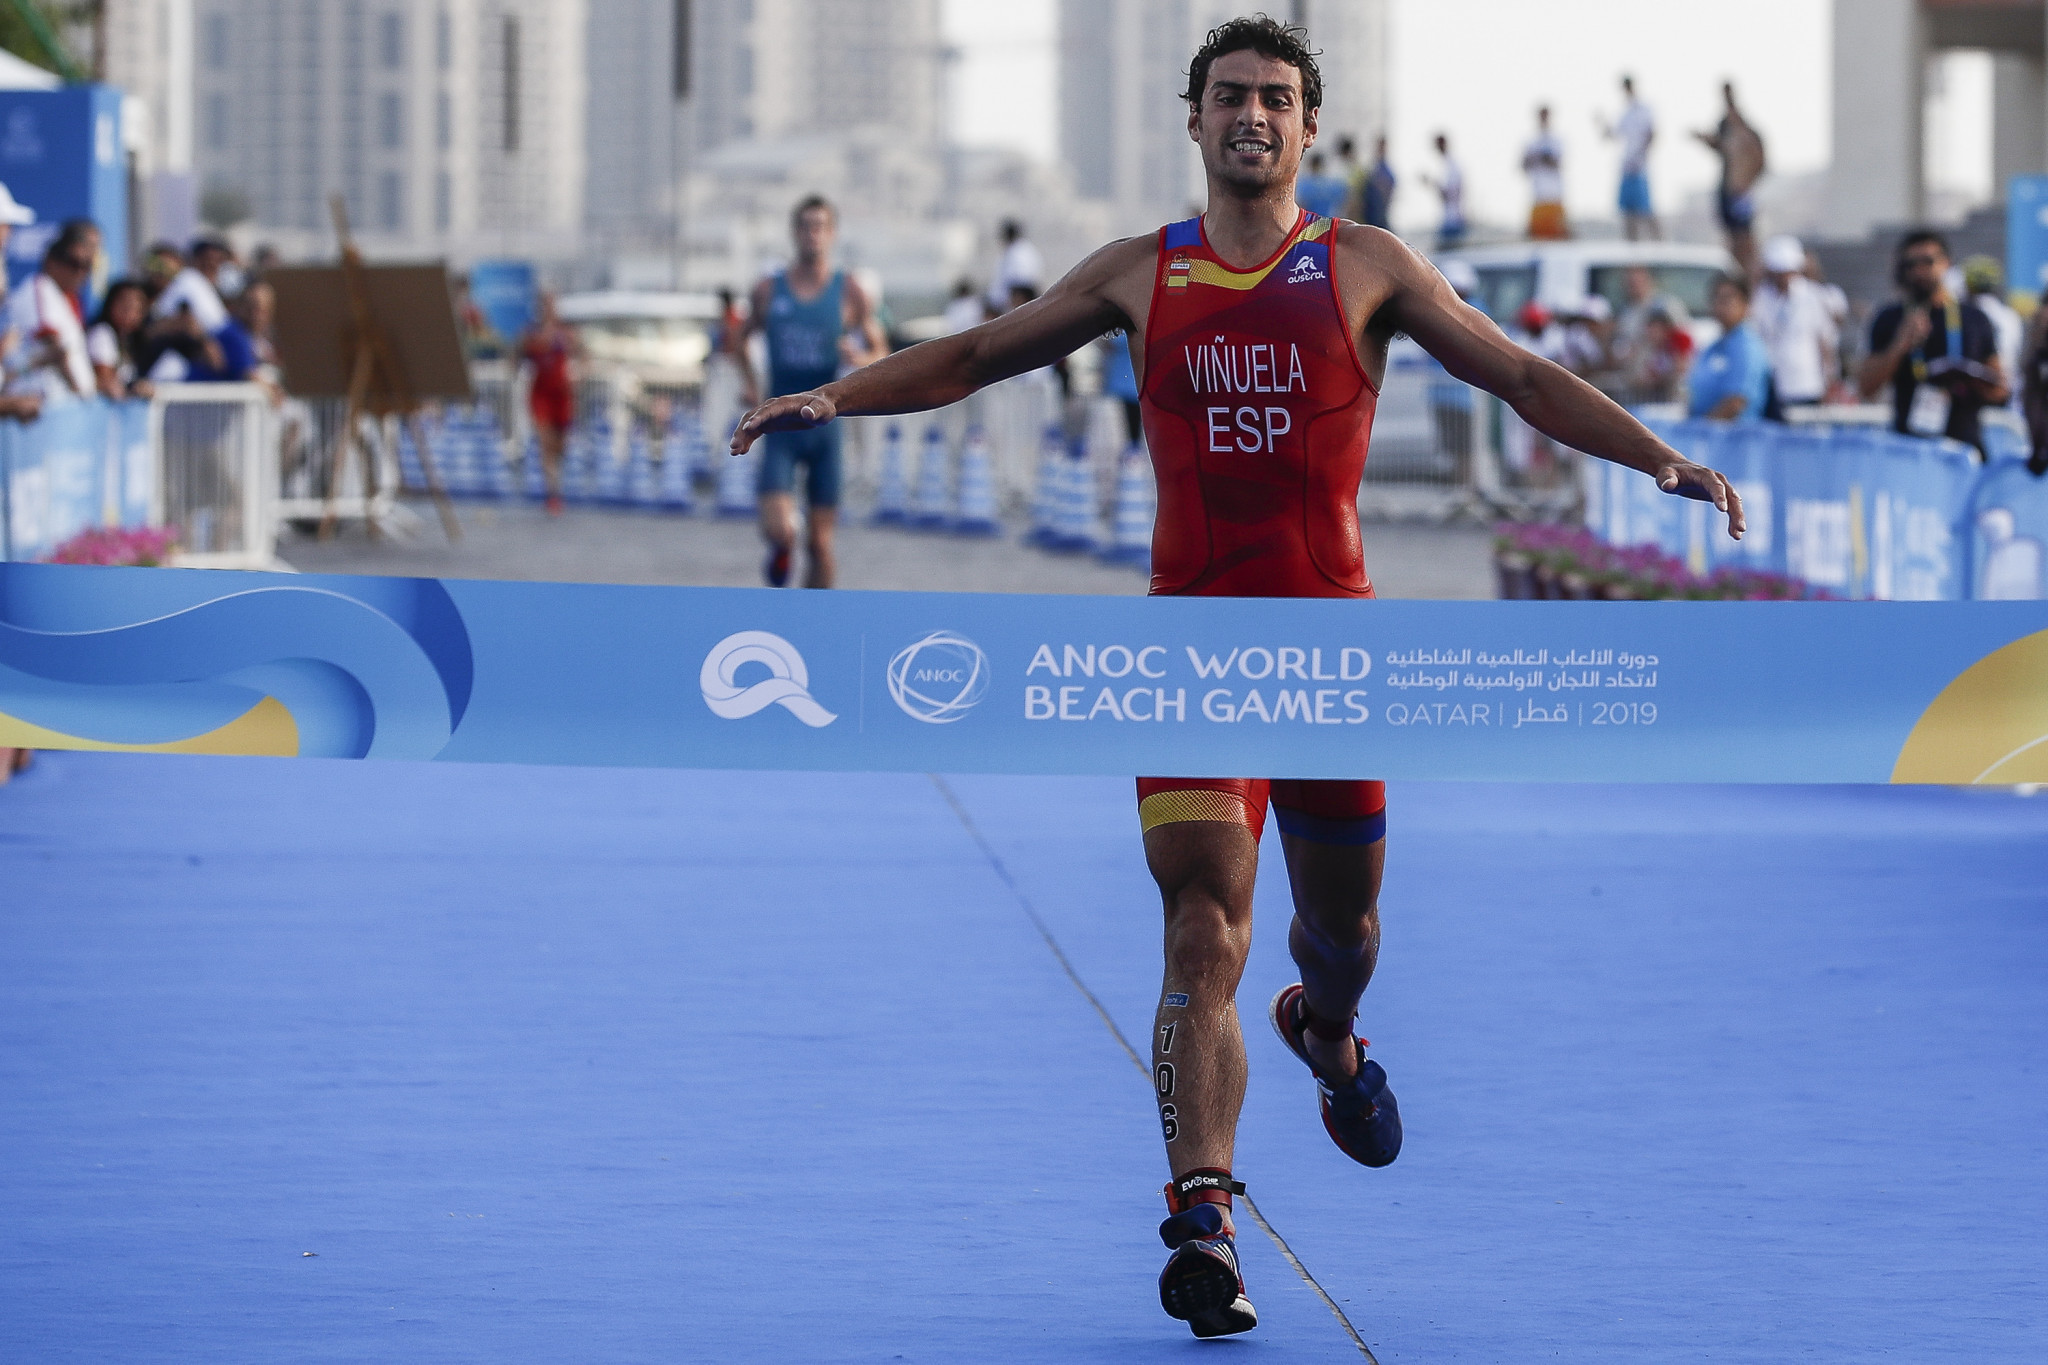 Spain complete another golden double at ANOC World Beach Games